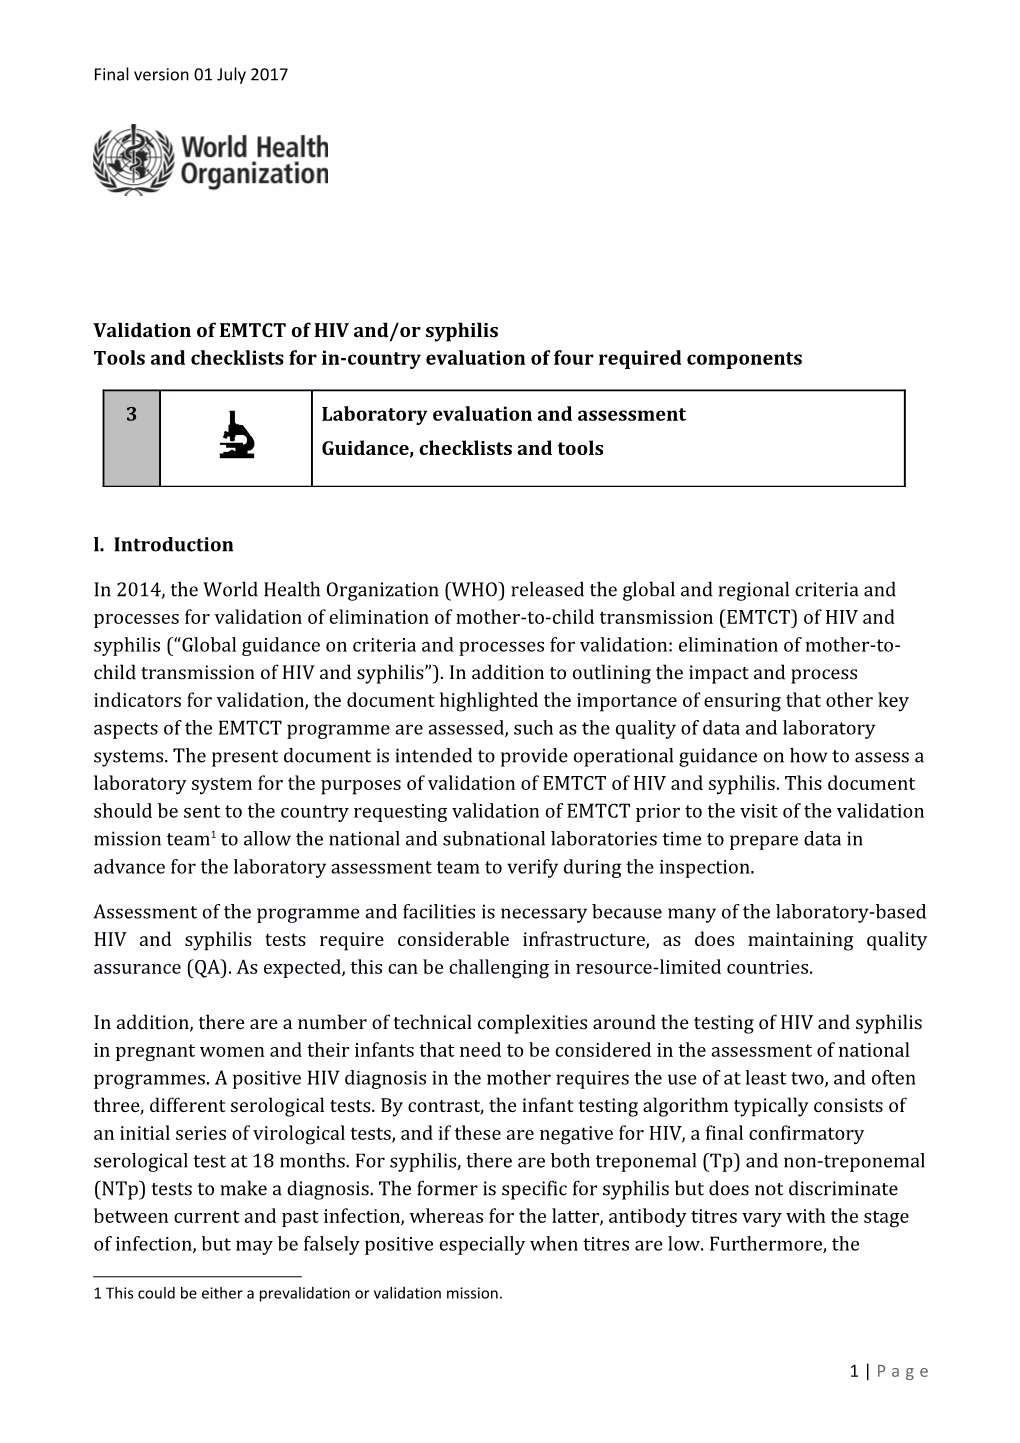 Validation of EMTCT of HIV And/Or Syphilis Tools and Checklists for In-Country Evaluation